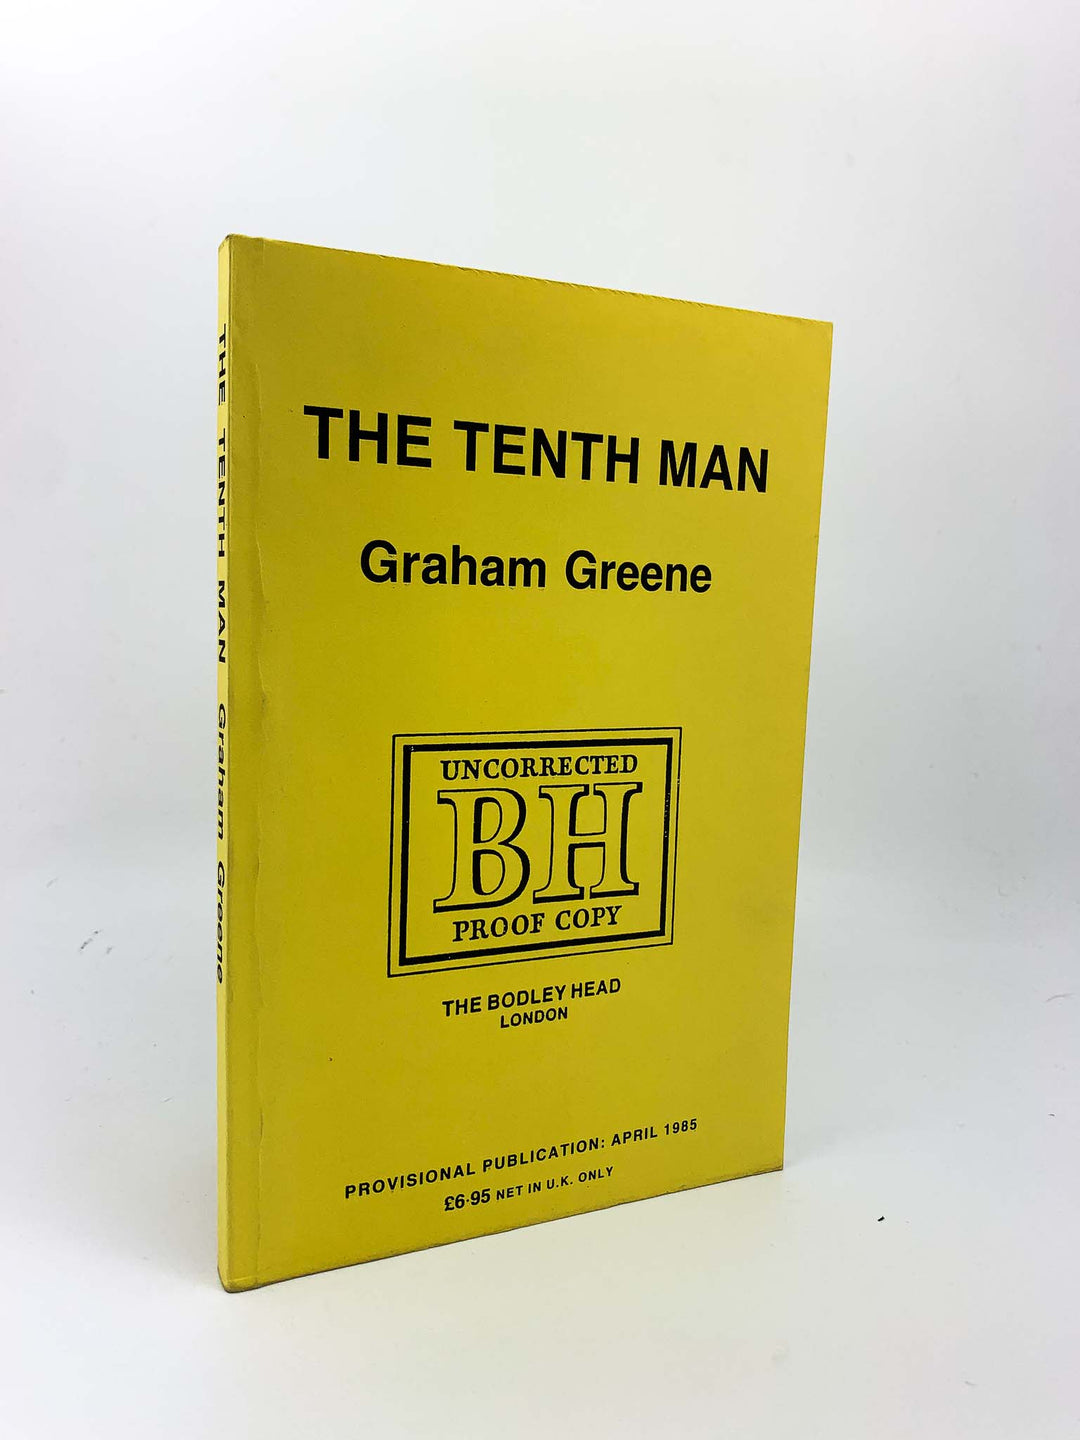 Greene, Graham - The Tenth Man - Uncorrected proof copy in proof wrapper | sample illustration